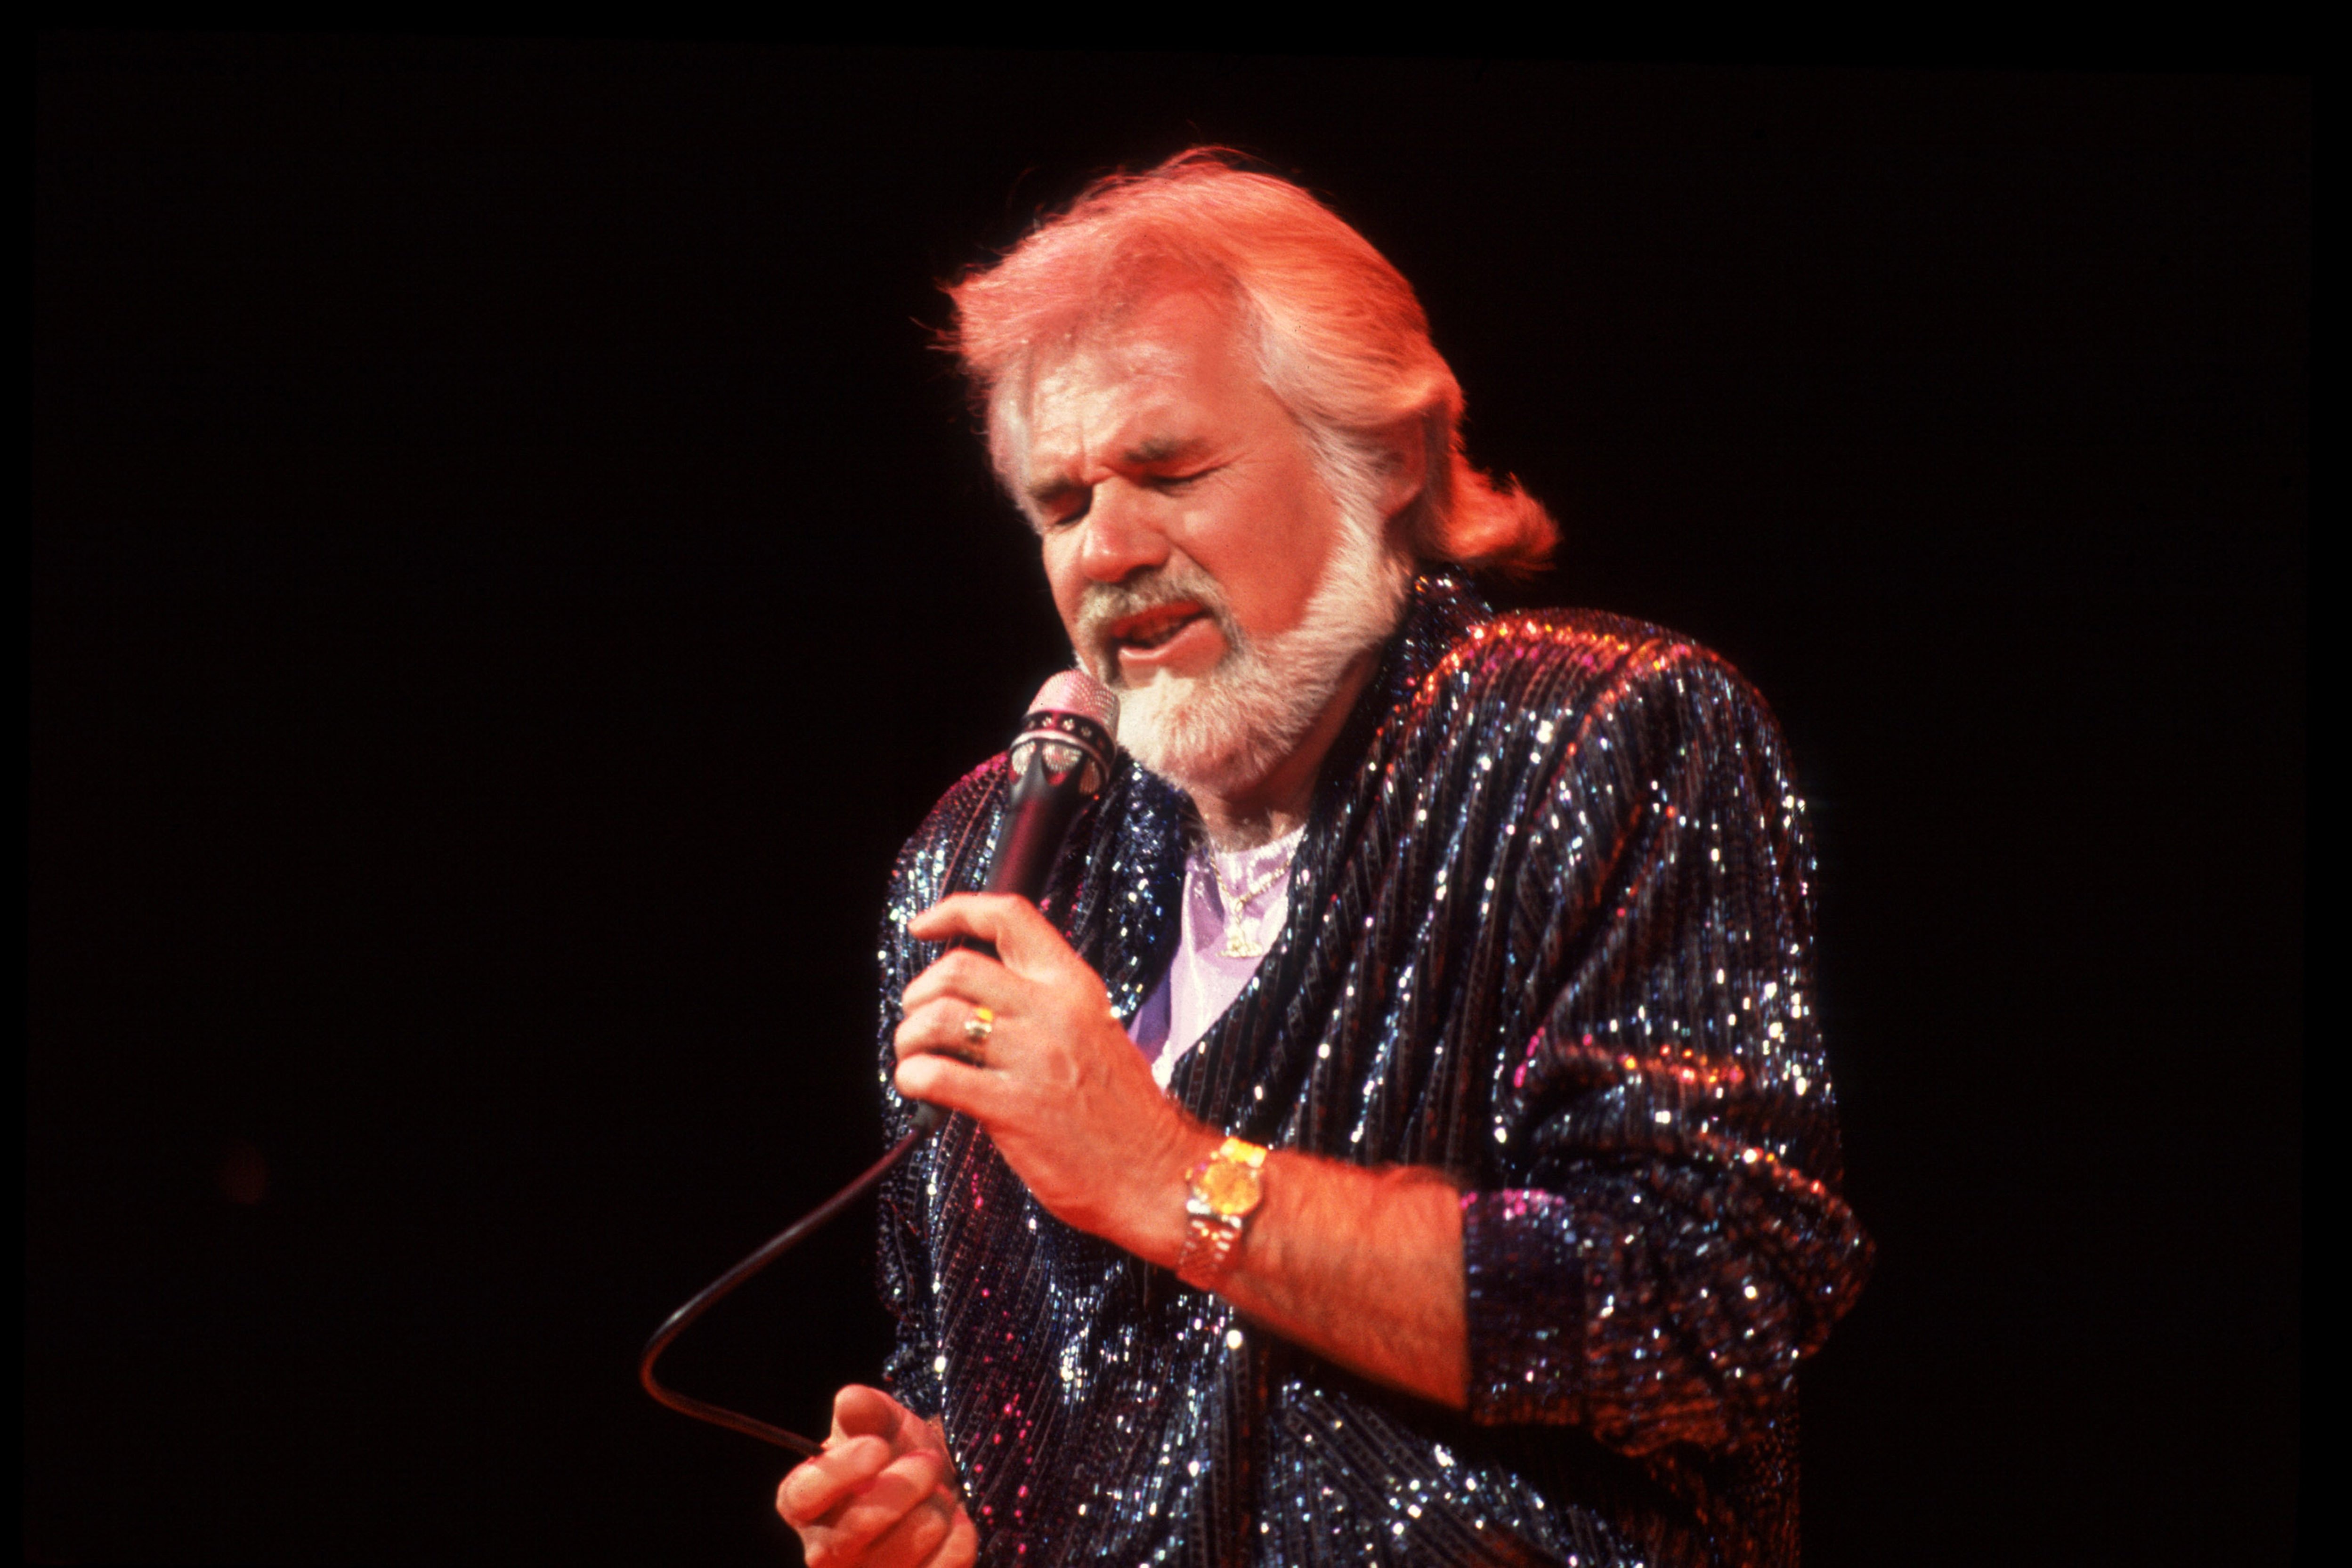 Kenny Rogers performs at the Rosemont Horizon (later renamed the Allstate Arena), Rosemont, Illinois, March 22, 1985. | Source: Getty Images